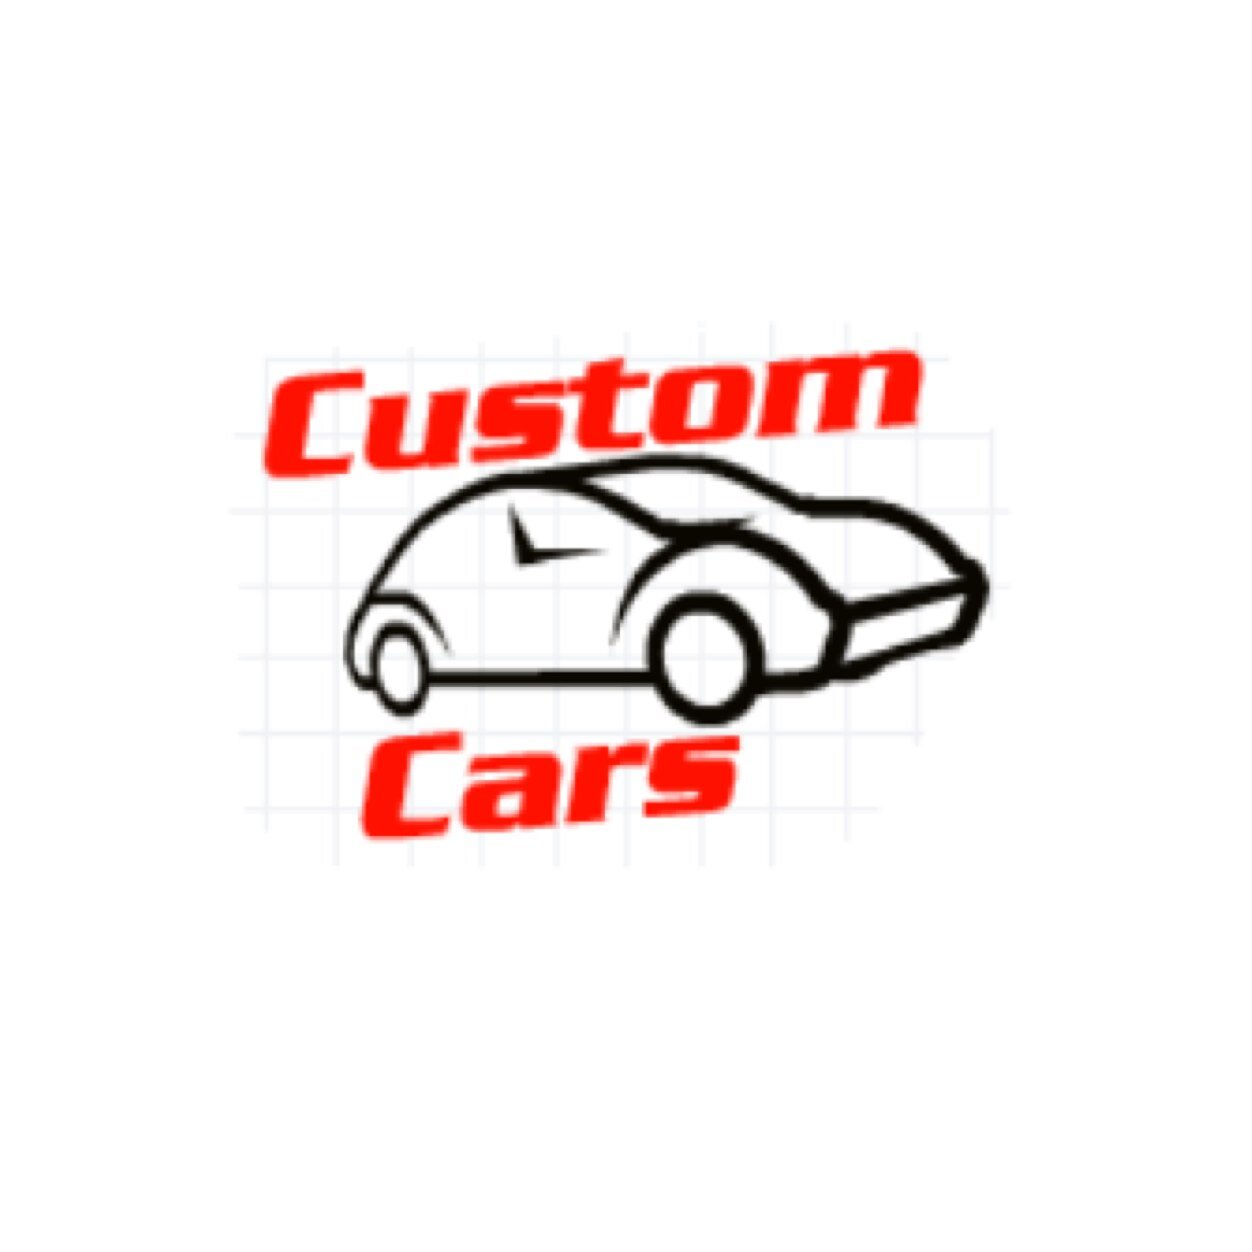 We're just a new auto sales and service shop business rapidly growing in the ctp. Let us build your dream car.